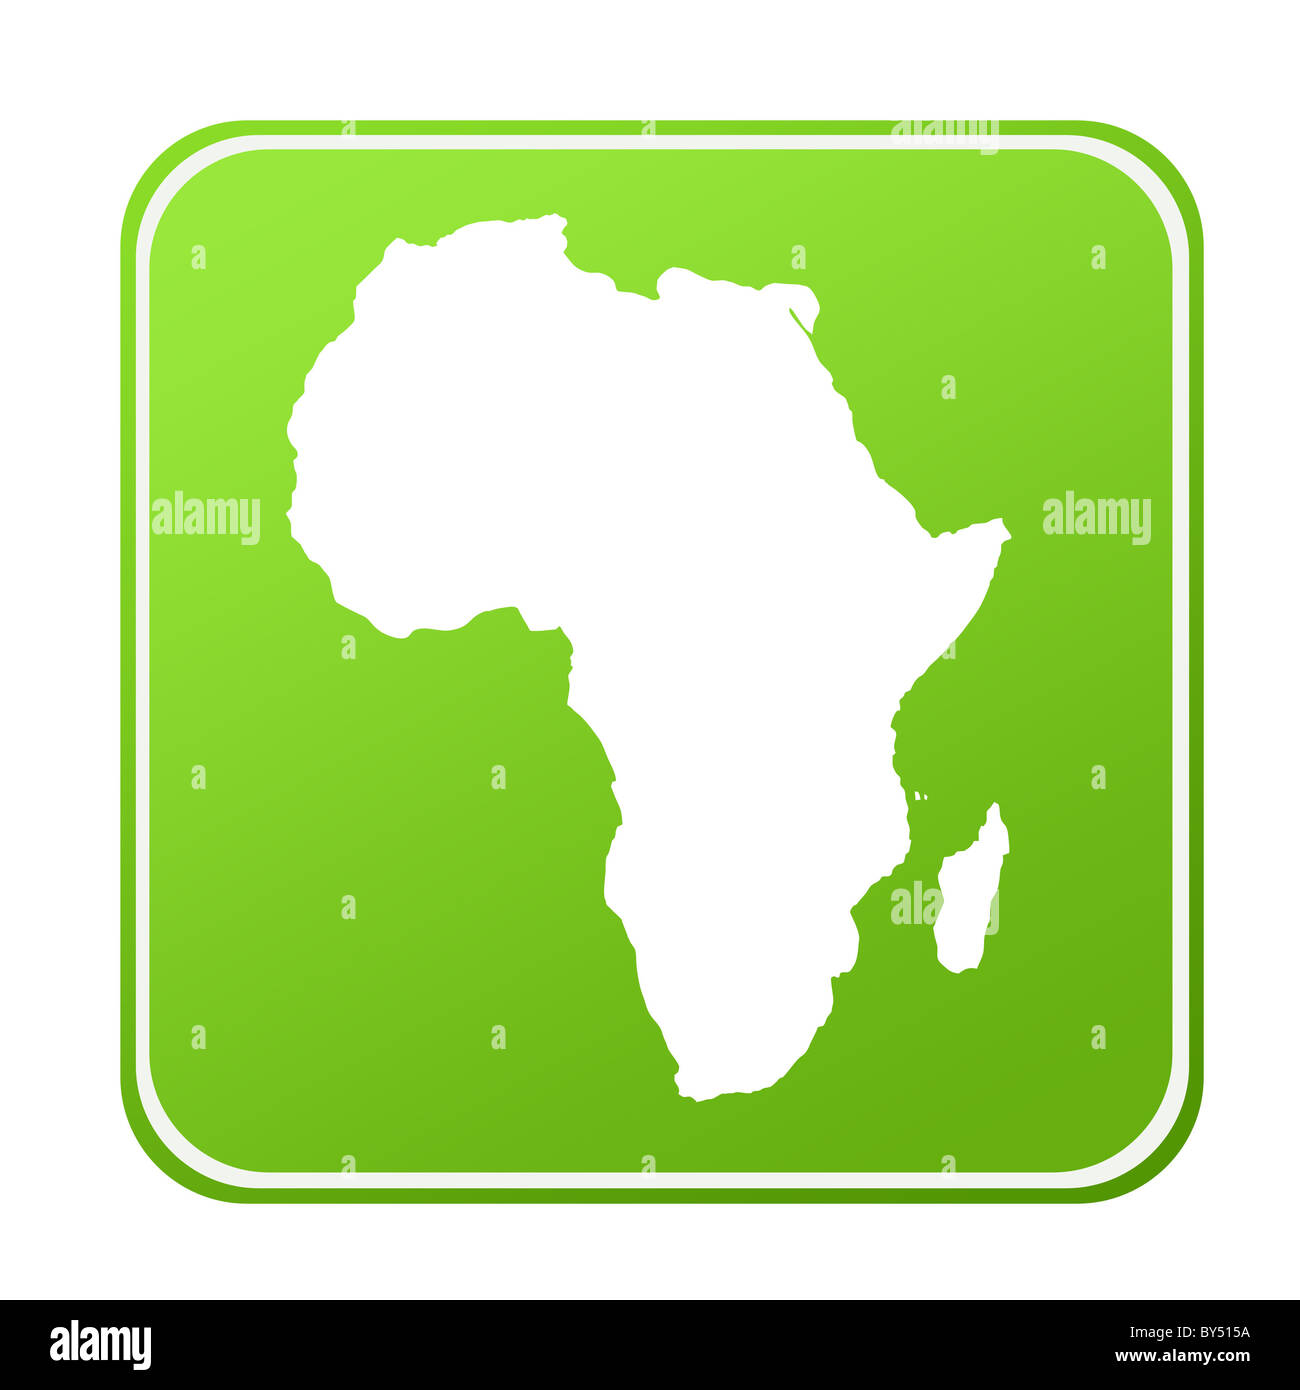 Silhouetted map of Africa on green Eco button, isolated on white background. Stock Photo